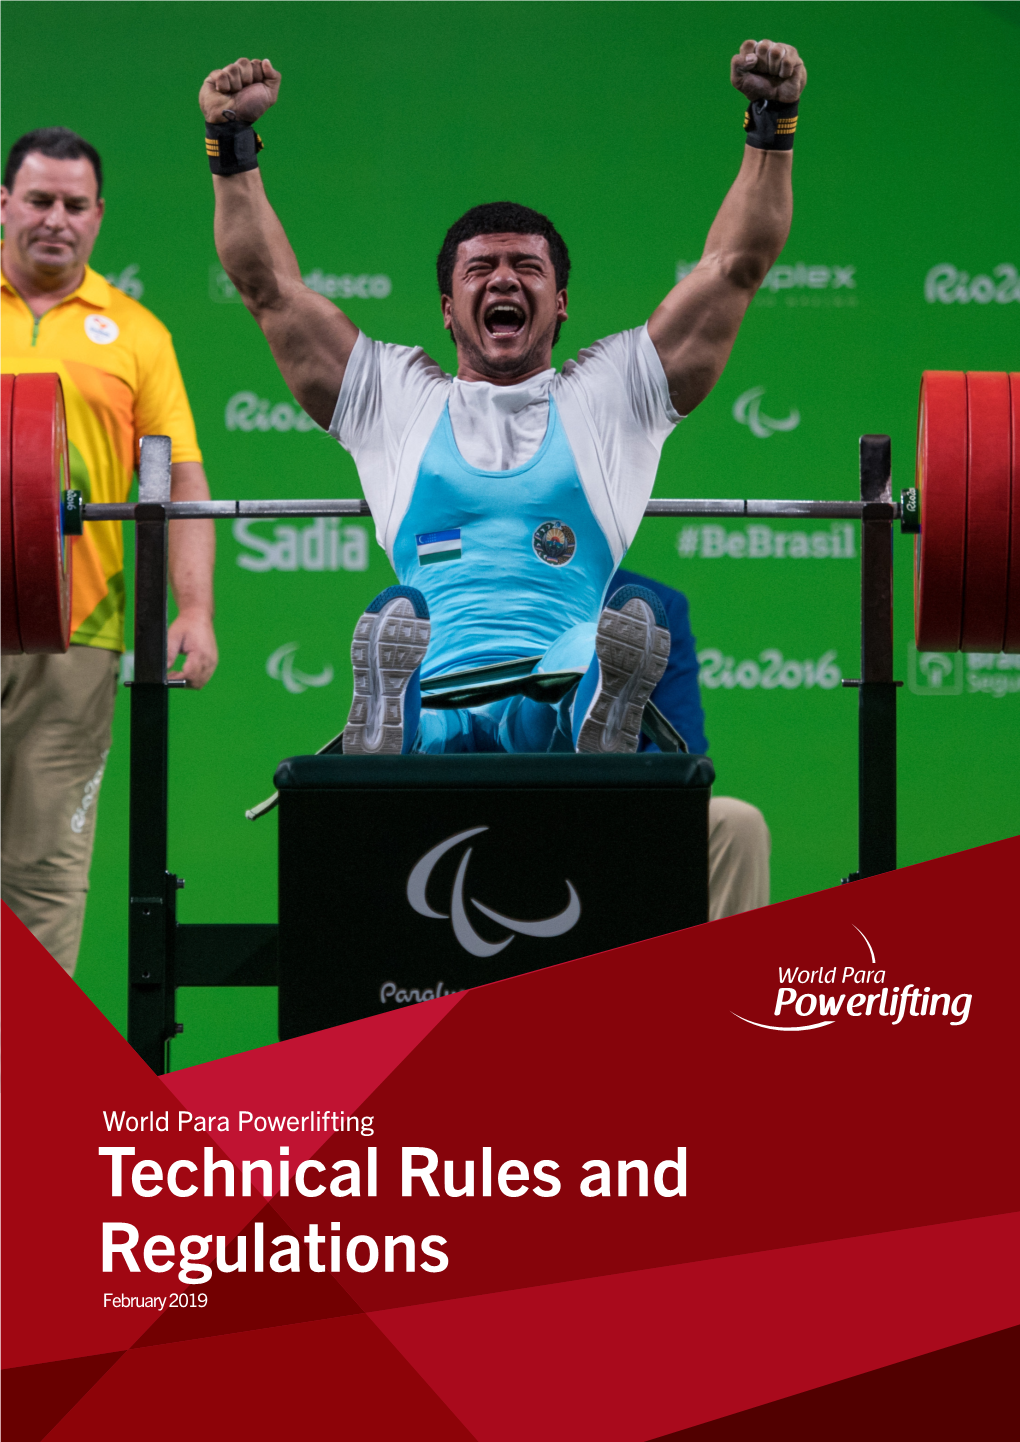 World Para Powerlifting Technical Rules and Regulations February 2019 Official Partner of World Para Powerlifting